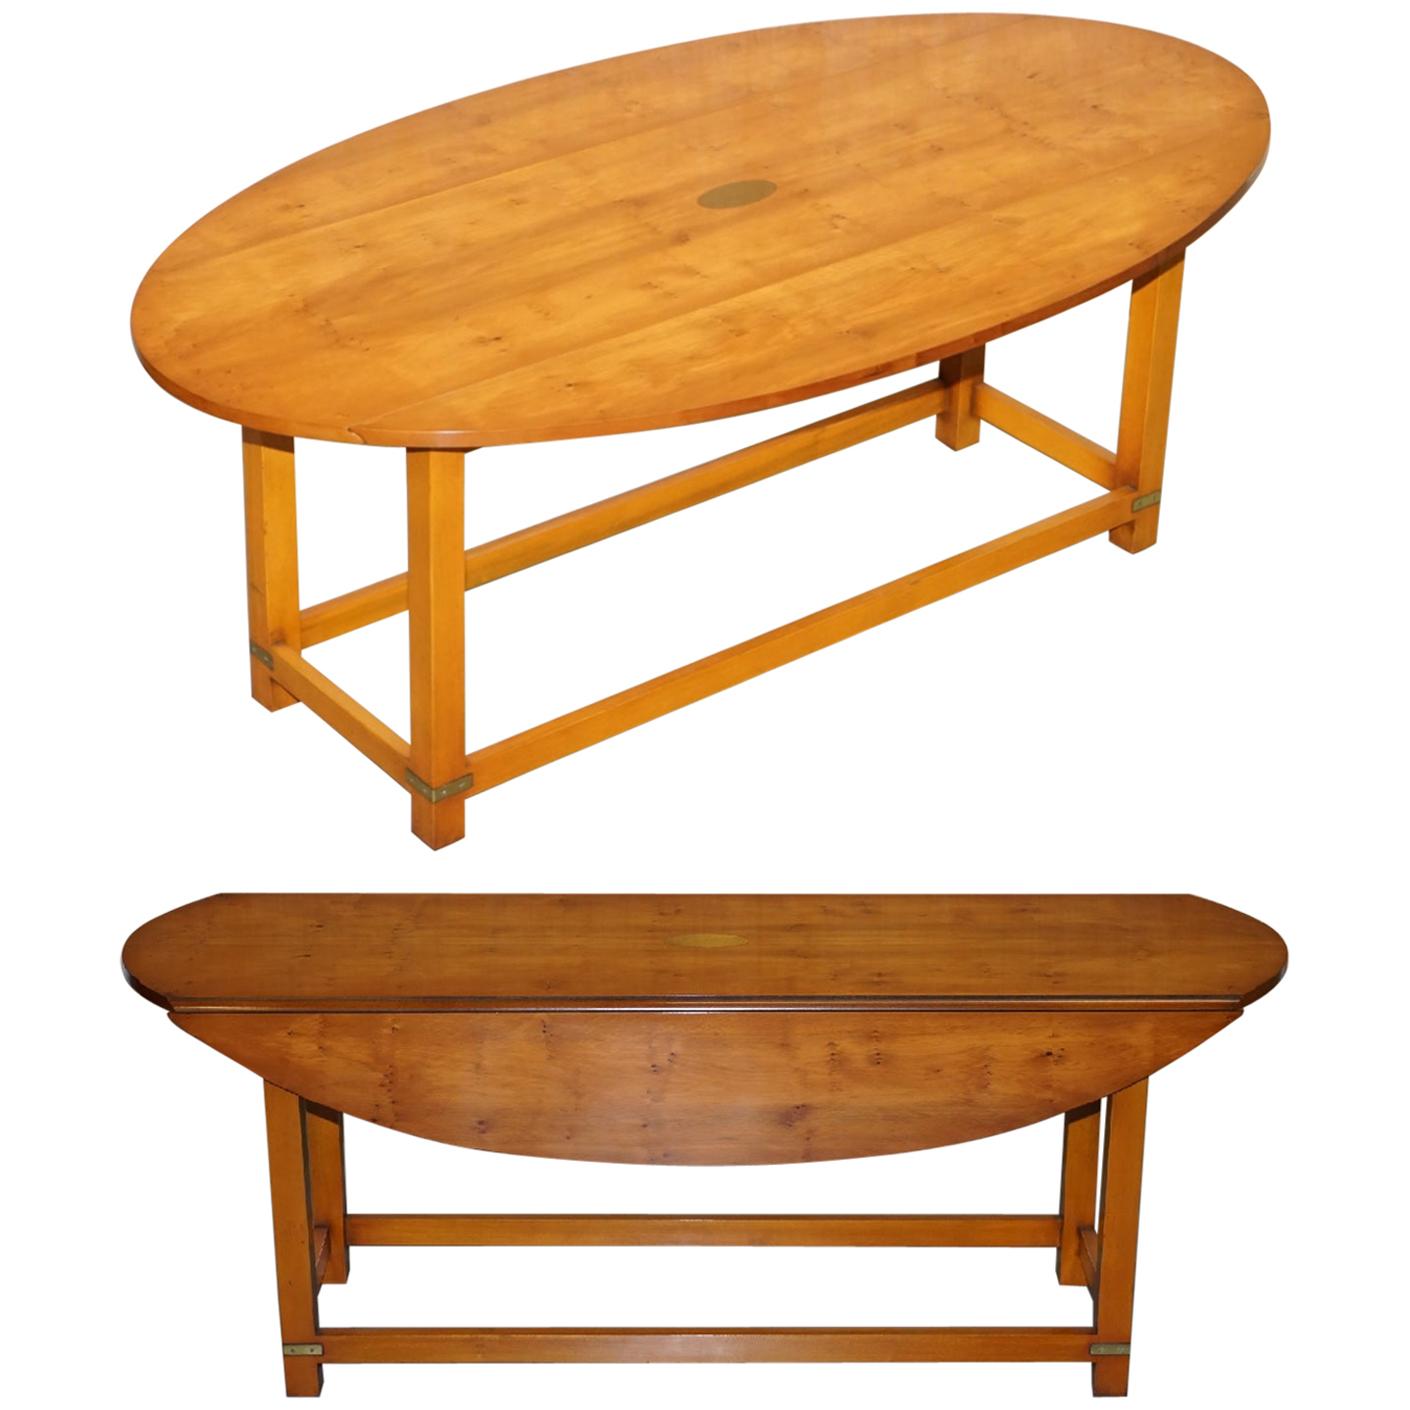 Bevan Funnell Burr Yew Wood Extending Oval Campaign Coffee Table For Sale